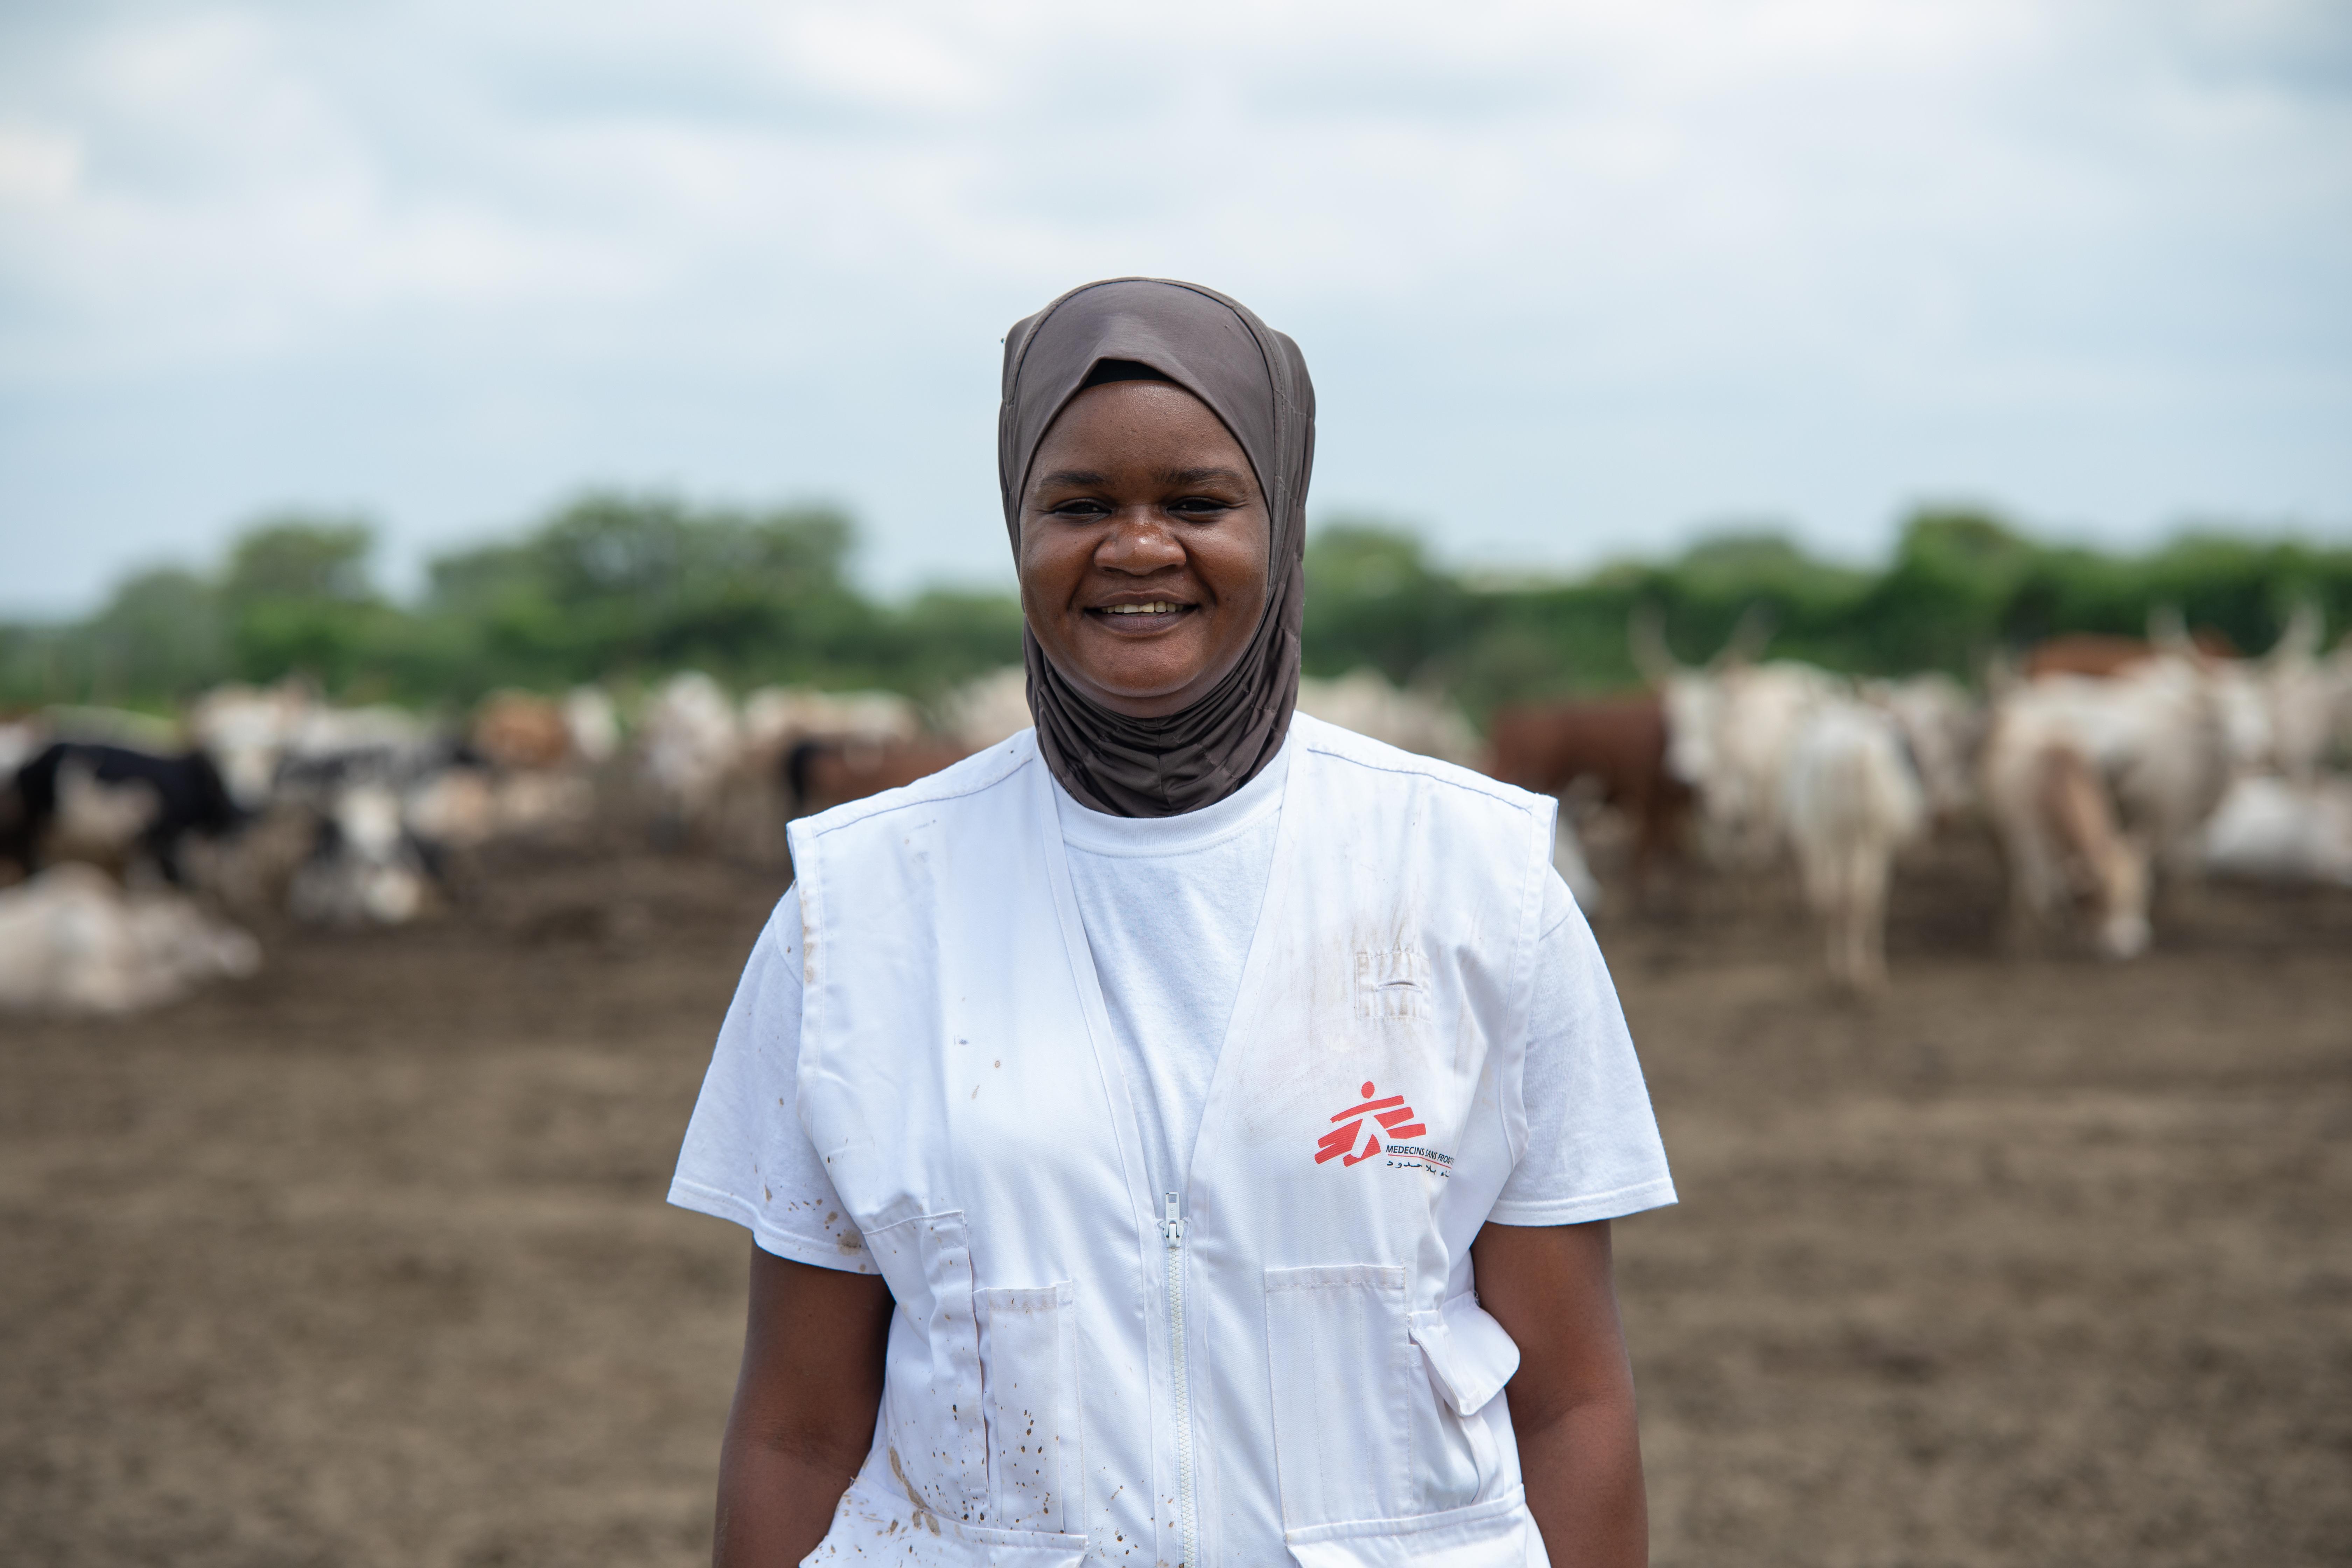 With a smile that reflects the impact of their work, an MSF Nurse Activity Manager, Awa Abdumadou poses for a photo after vising on of the Integrated Community Case Management (ICCM) sites.